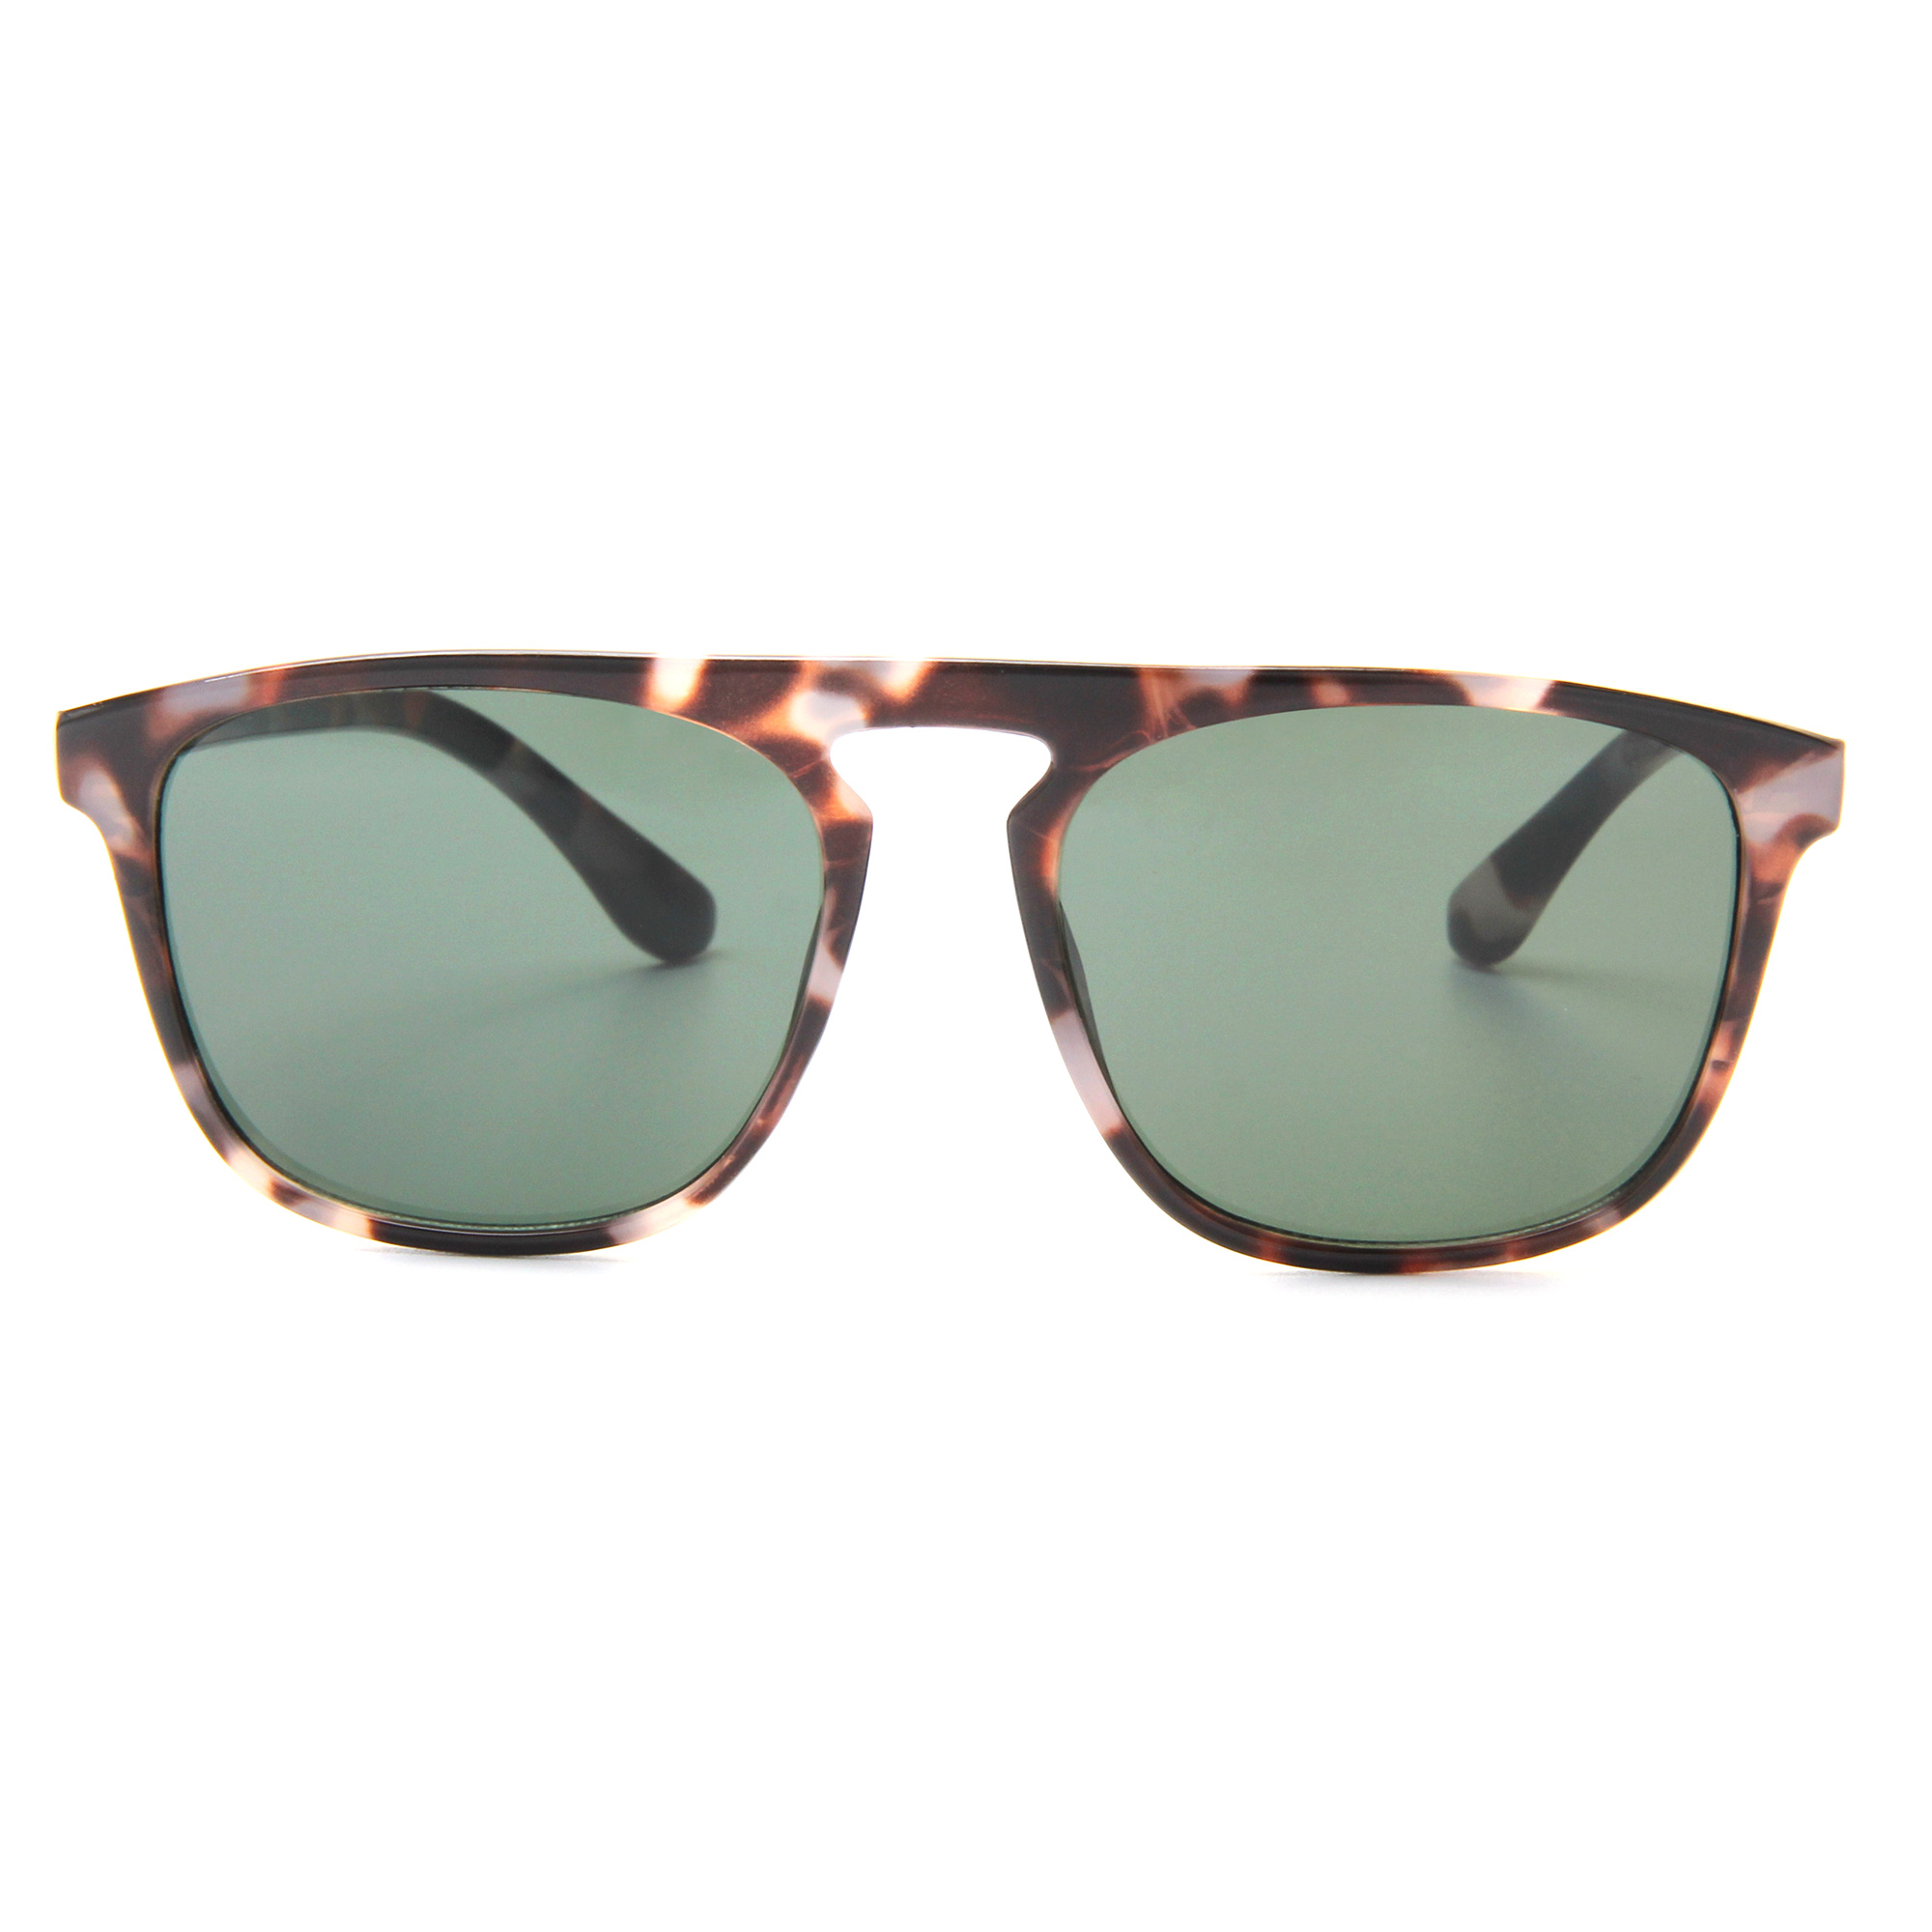 Ins unisex sunglasses made in china for gift-1